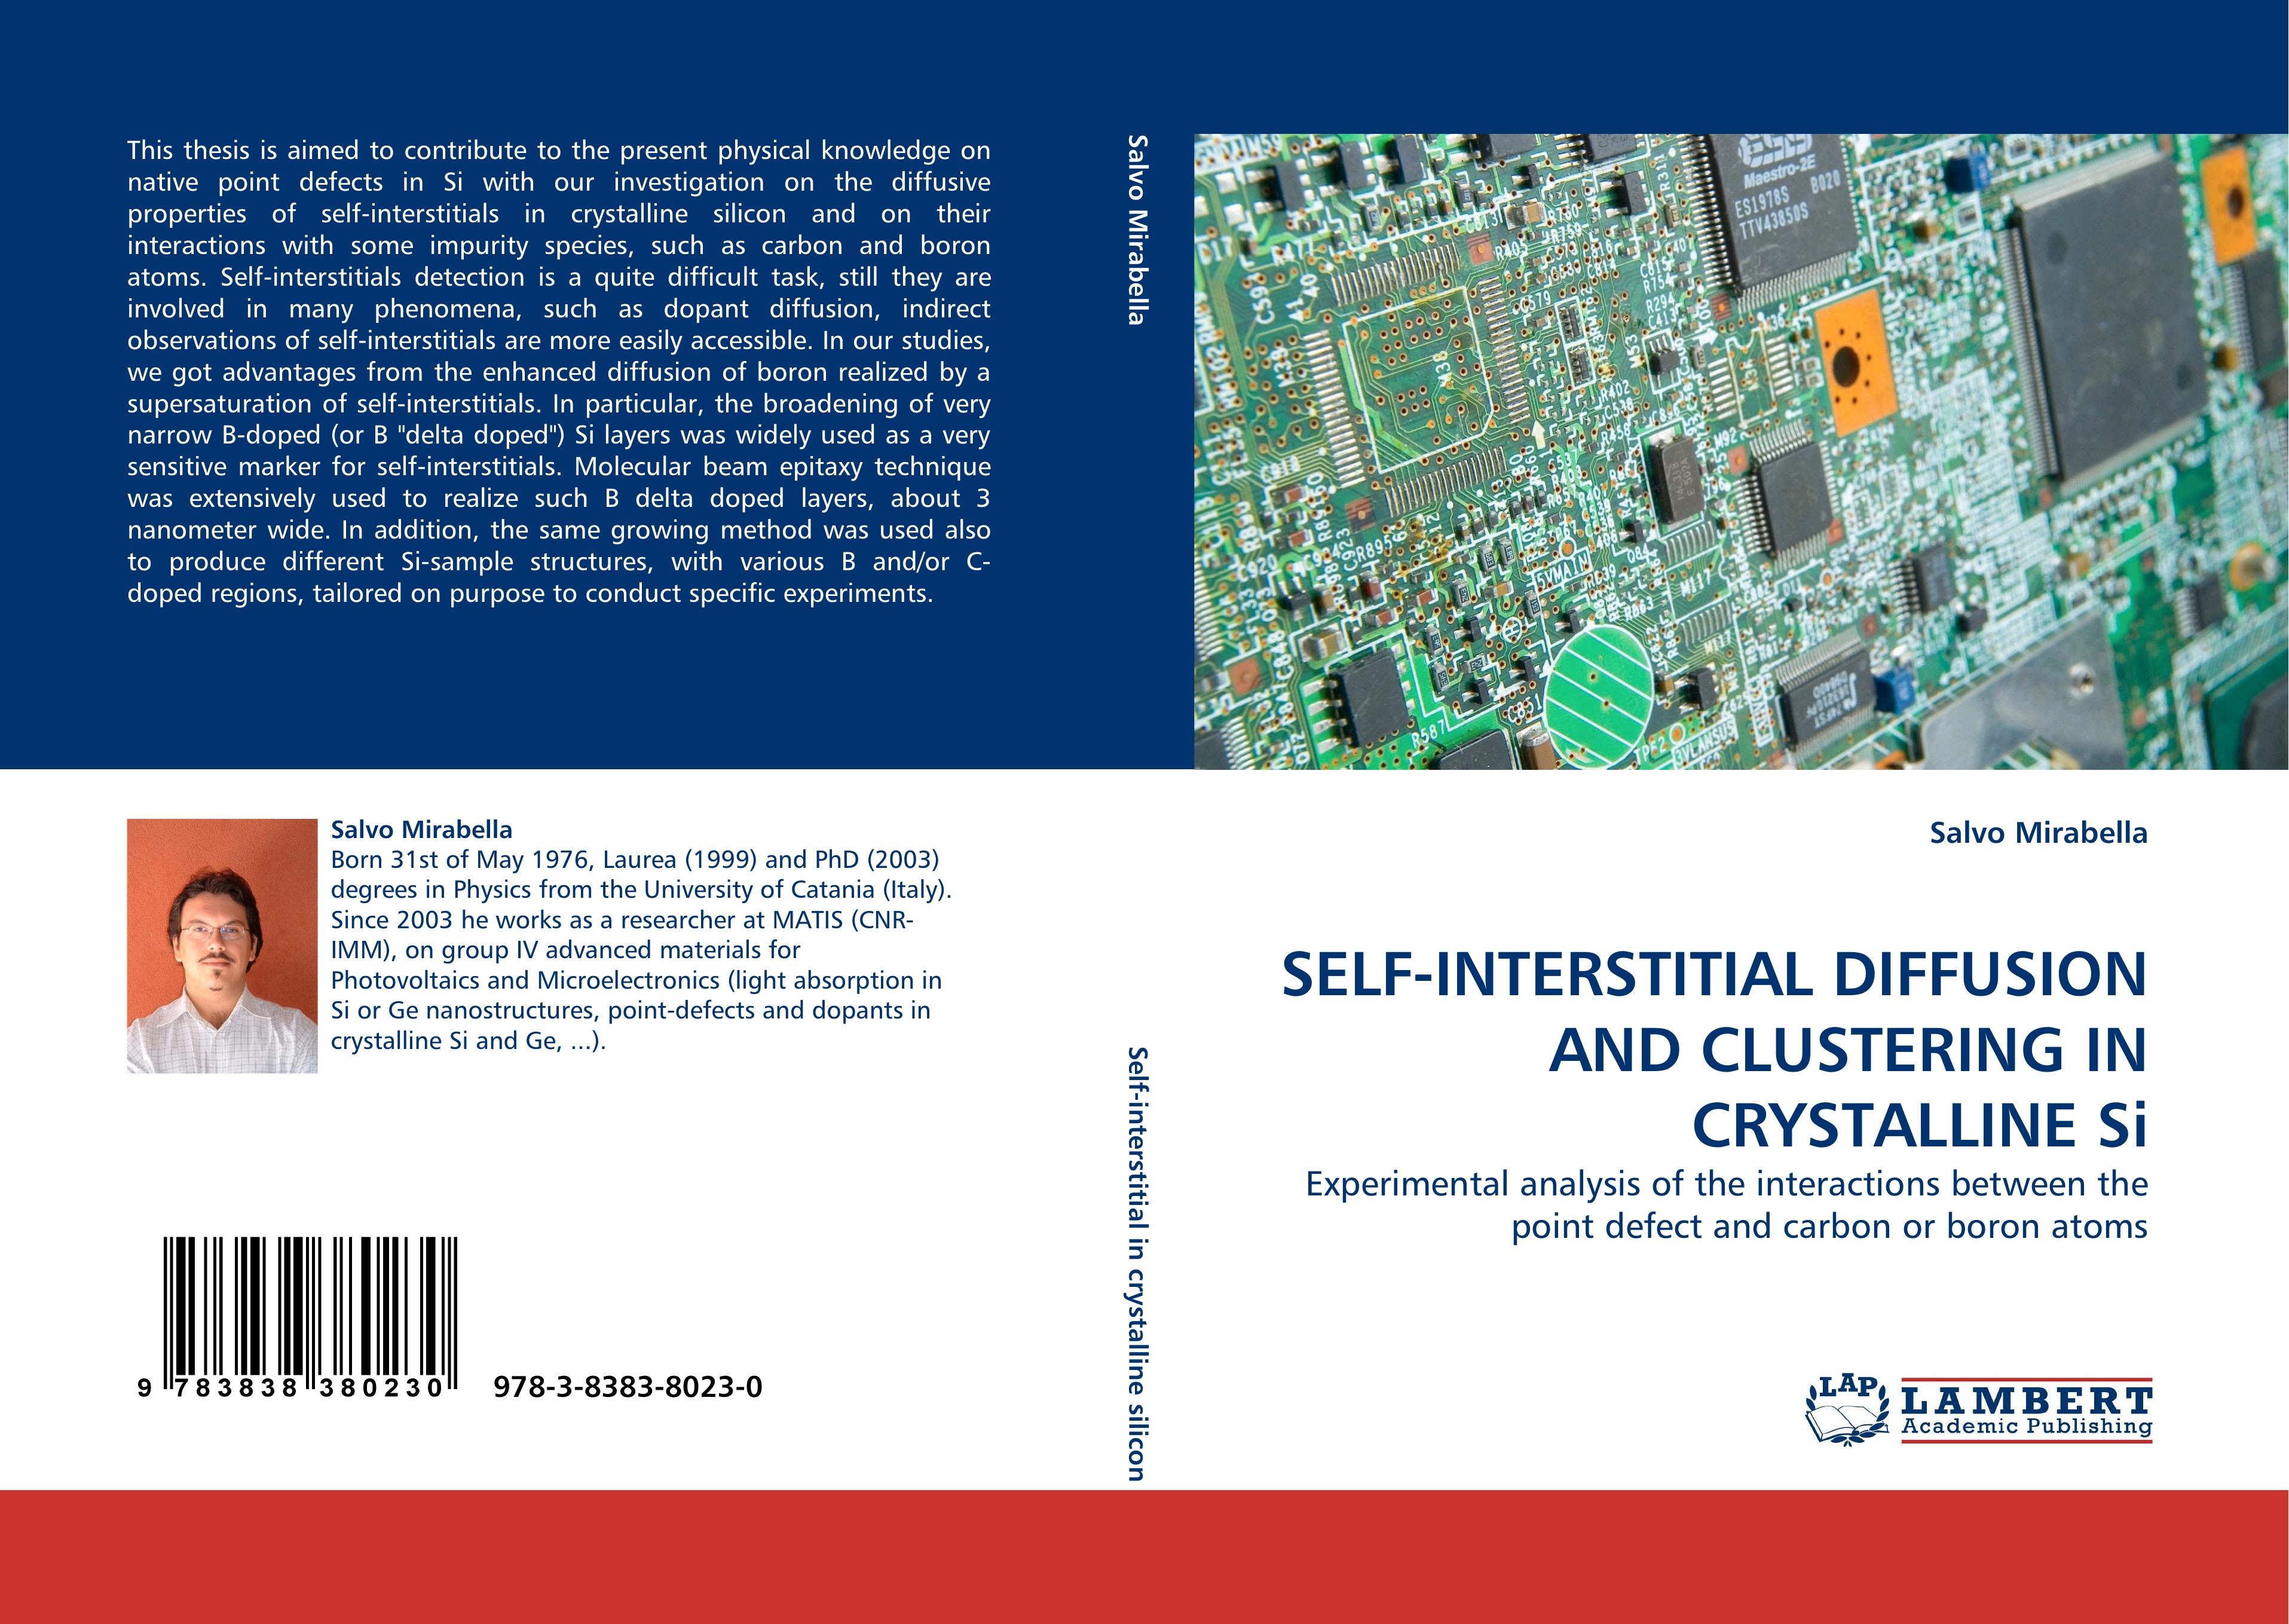 SELF-INTERSTITIAL DIFFUSION AND CLUSTERING IN CRYSTALLINE Si / Experimental analysis of the interactions between the point defect and carbon or boron atoms / Salvo Mirabella / Taschenbuch / Paperback - Mirabella, Salvo